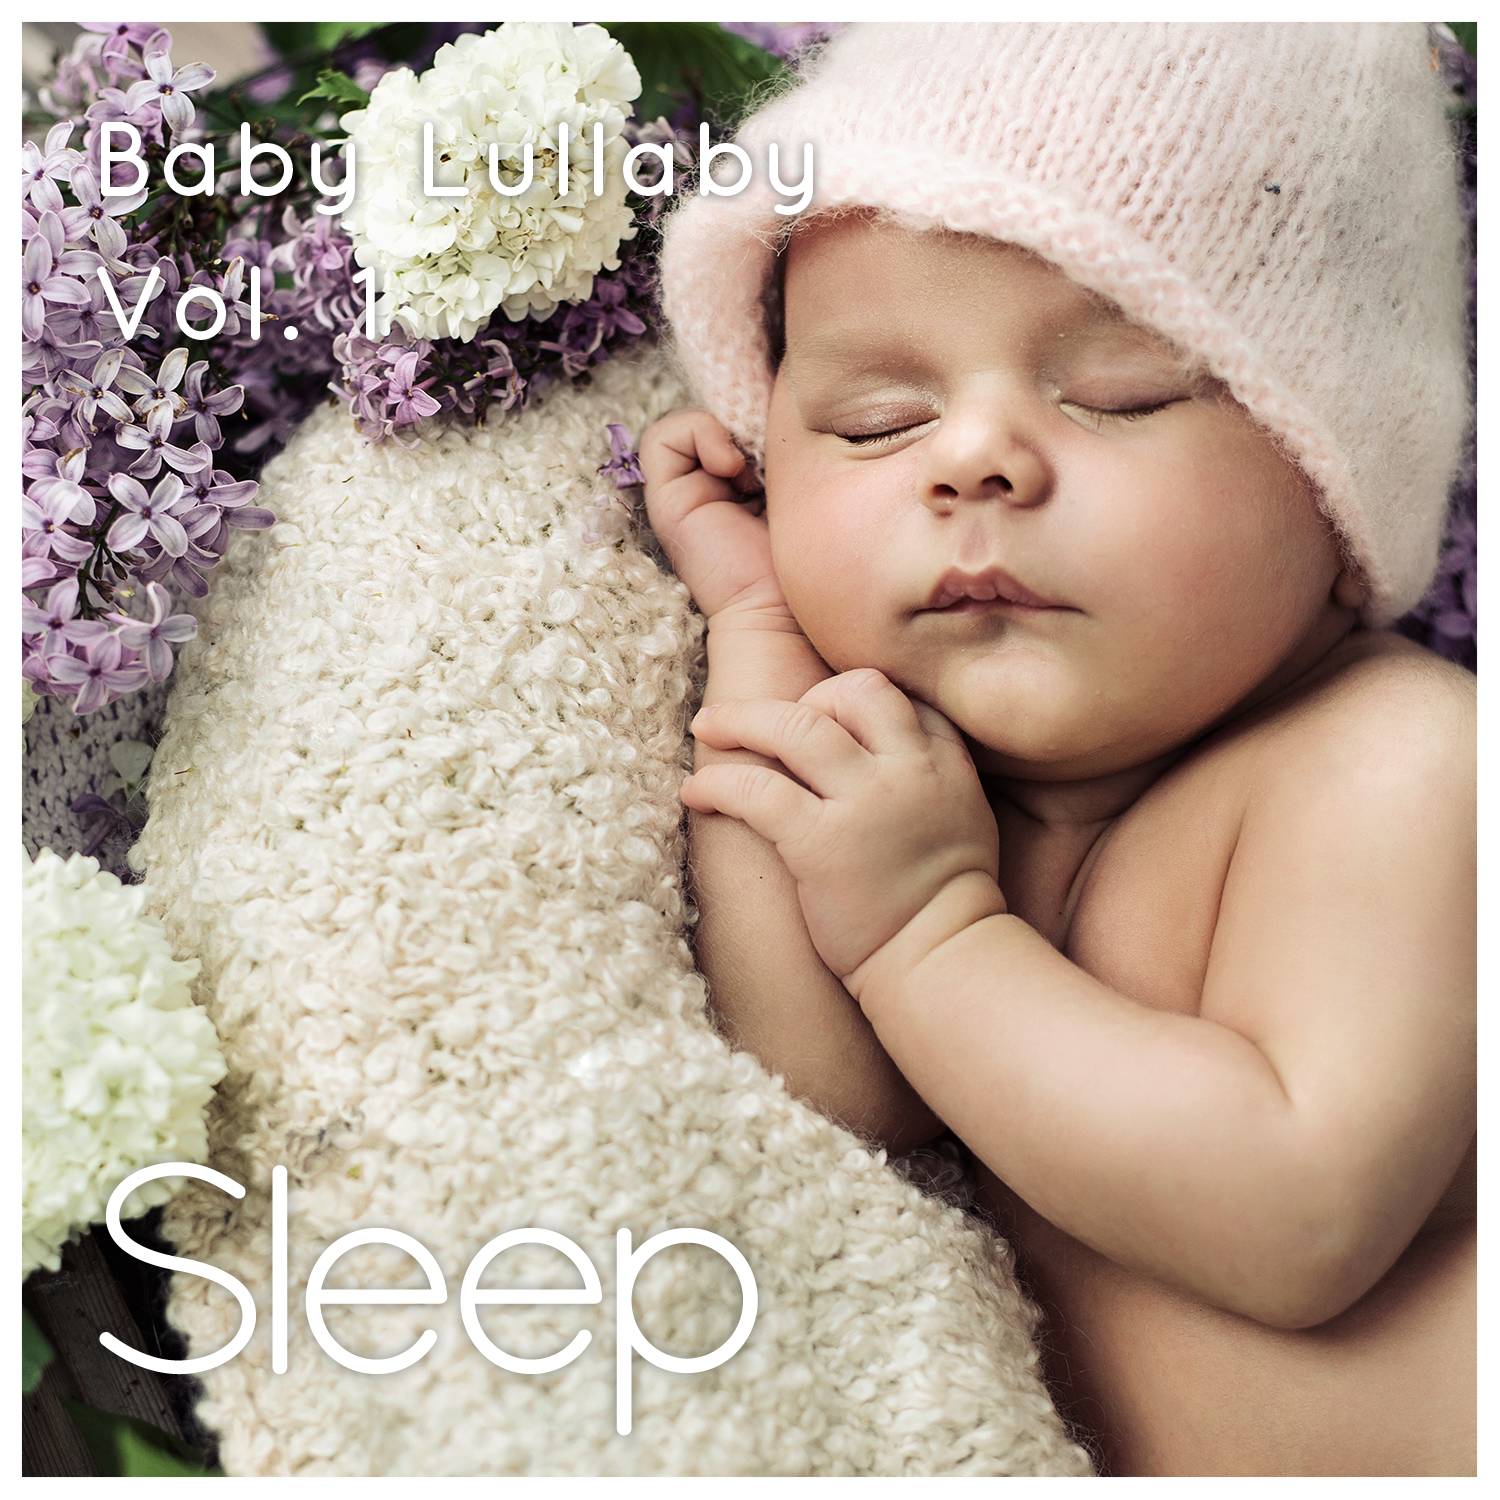 Baby Sleep Ambient Lullaby, Pt. 2